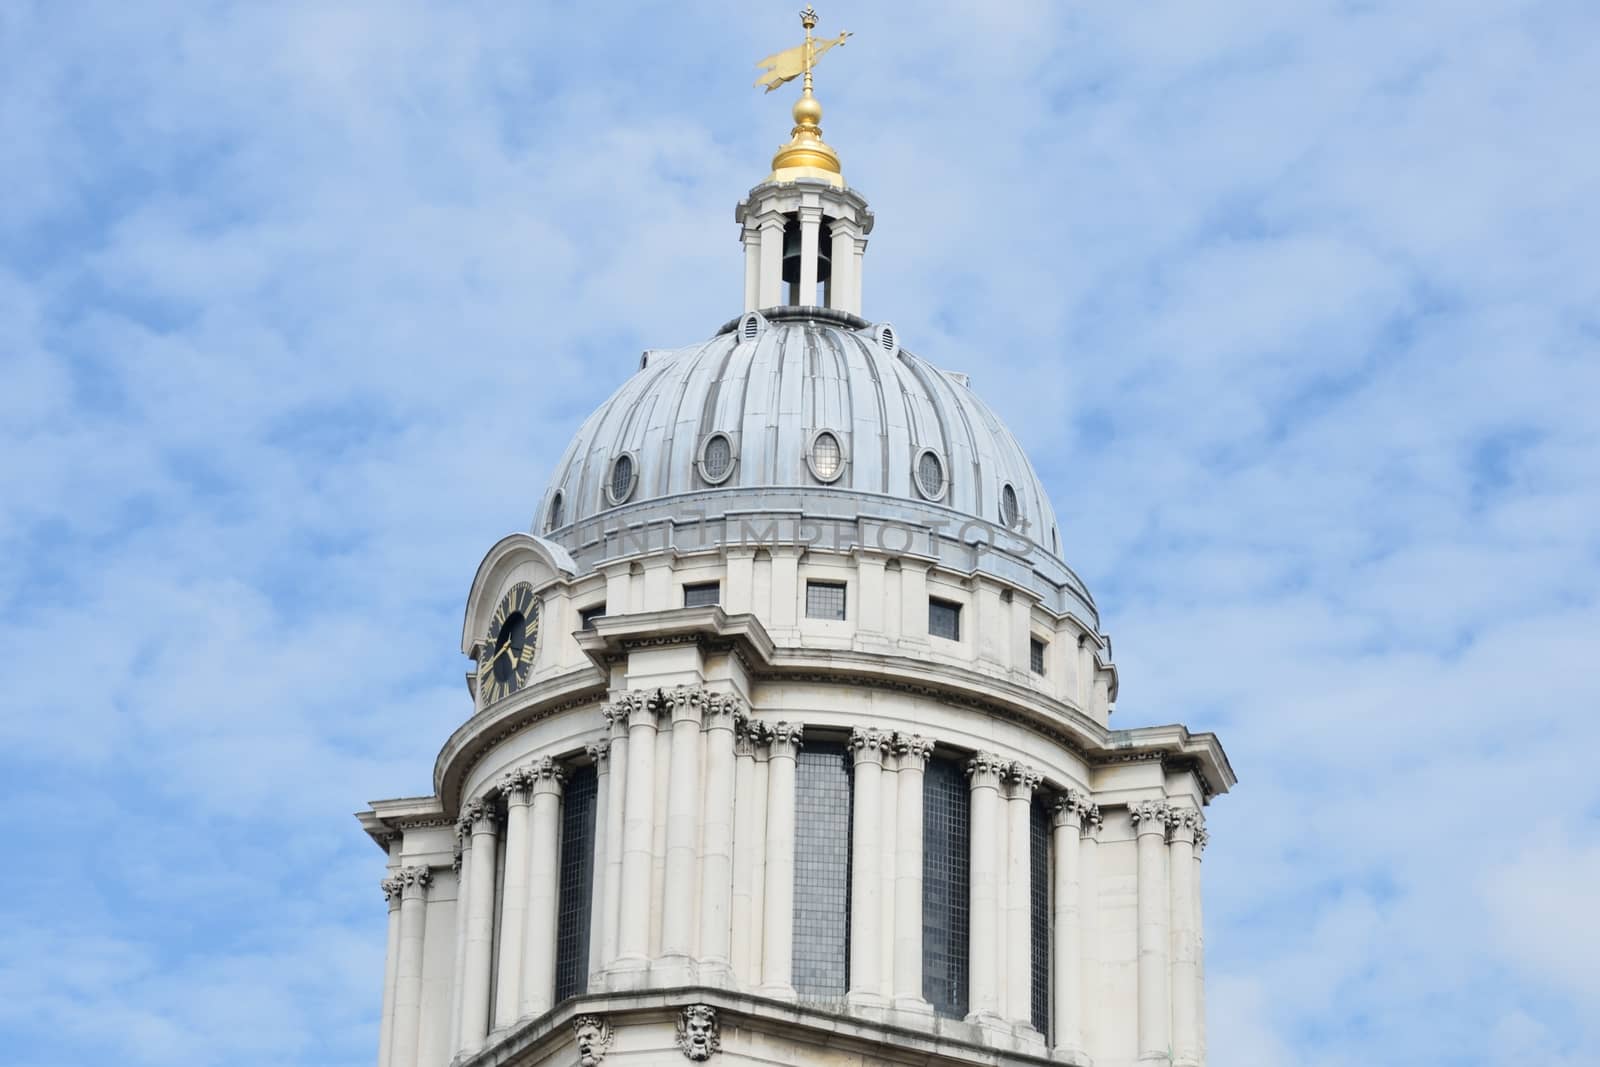 Top of Greenwich Naval college dome